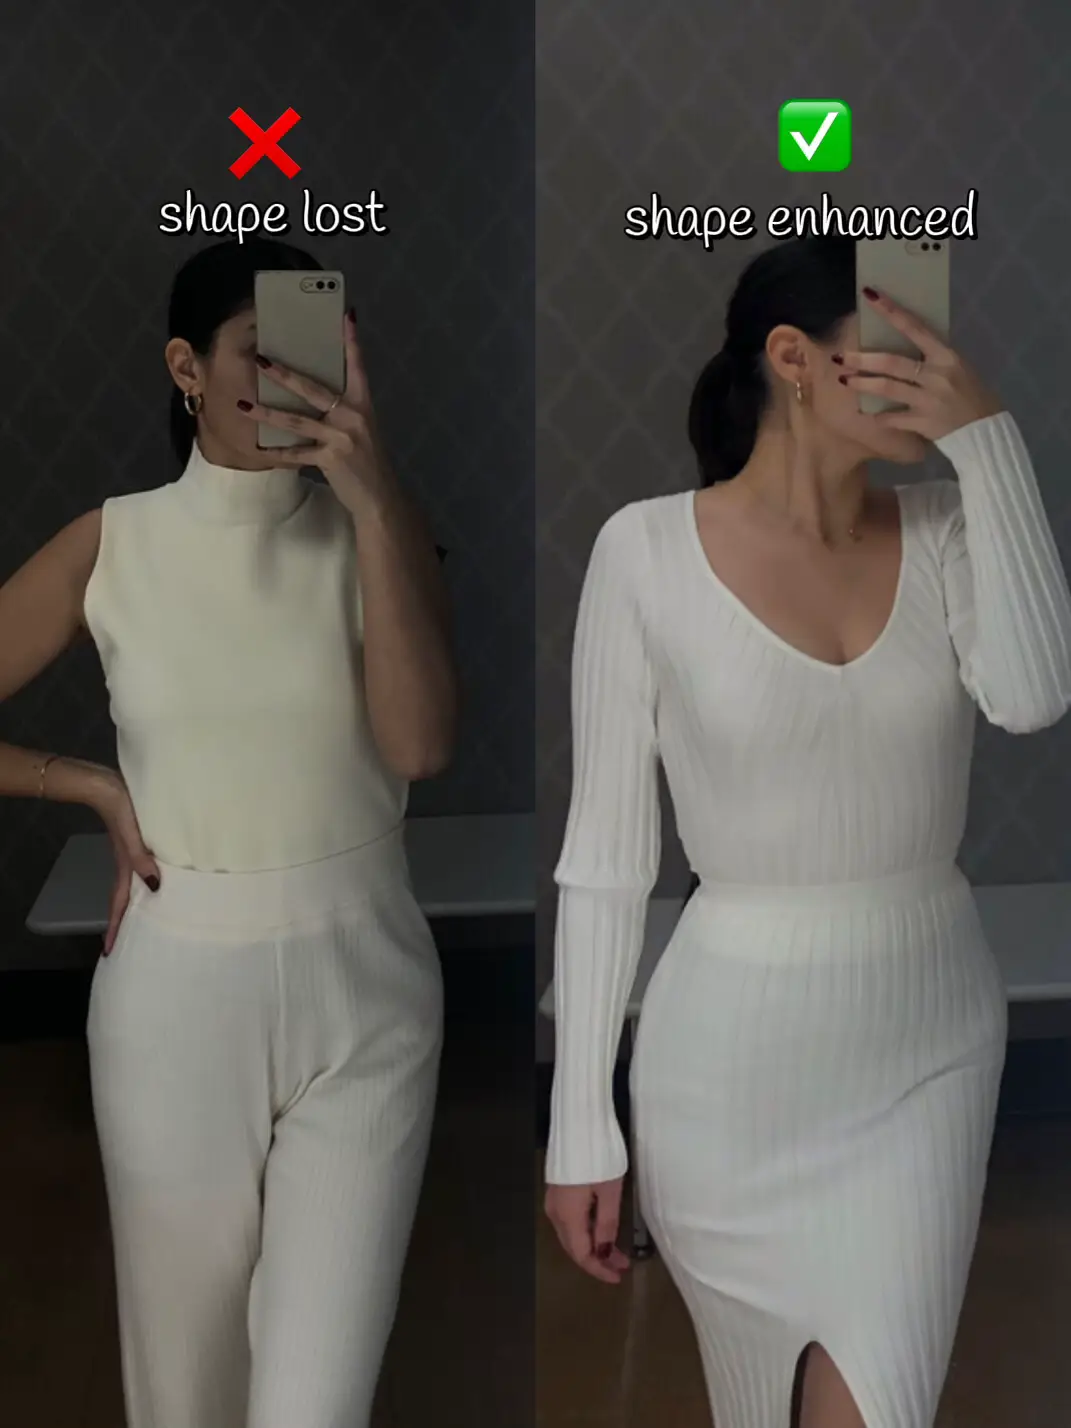 Shapermint - “Shapewear makes me feel so amazing. I don't know about you  but I used to look at wearing shapewear in a negative light but I'm so  happy that I've fallen